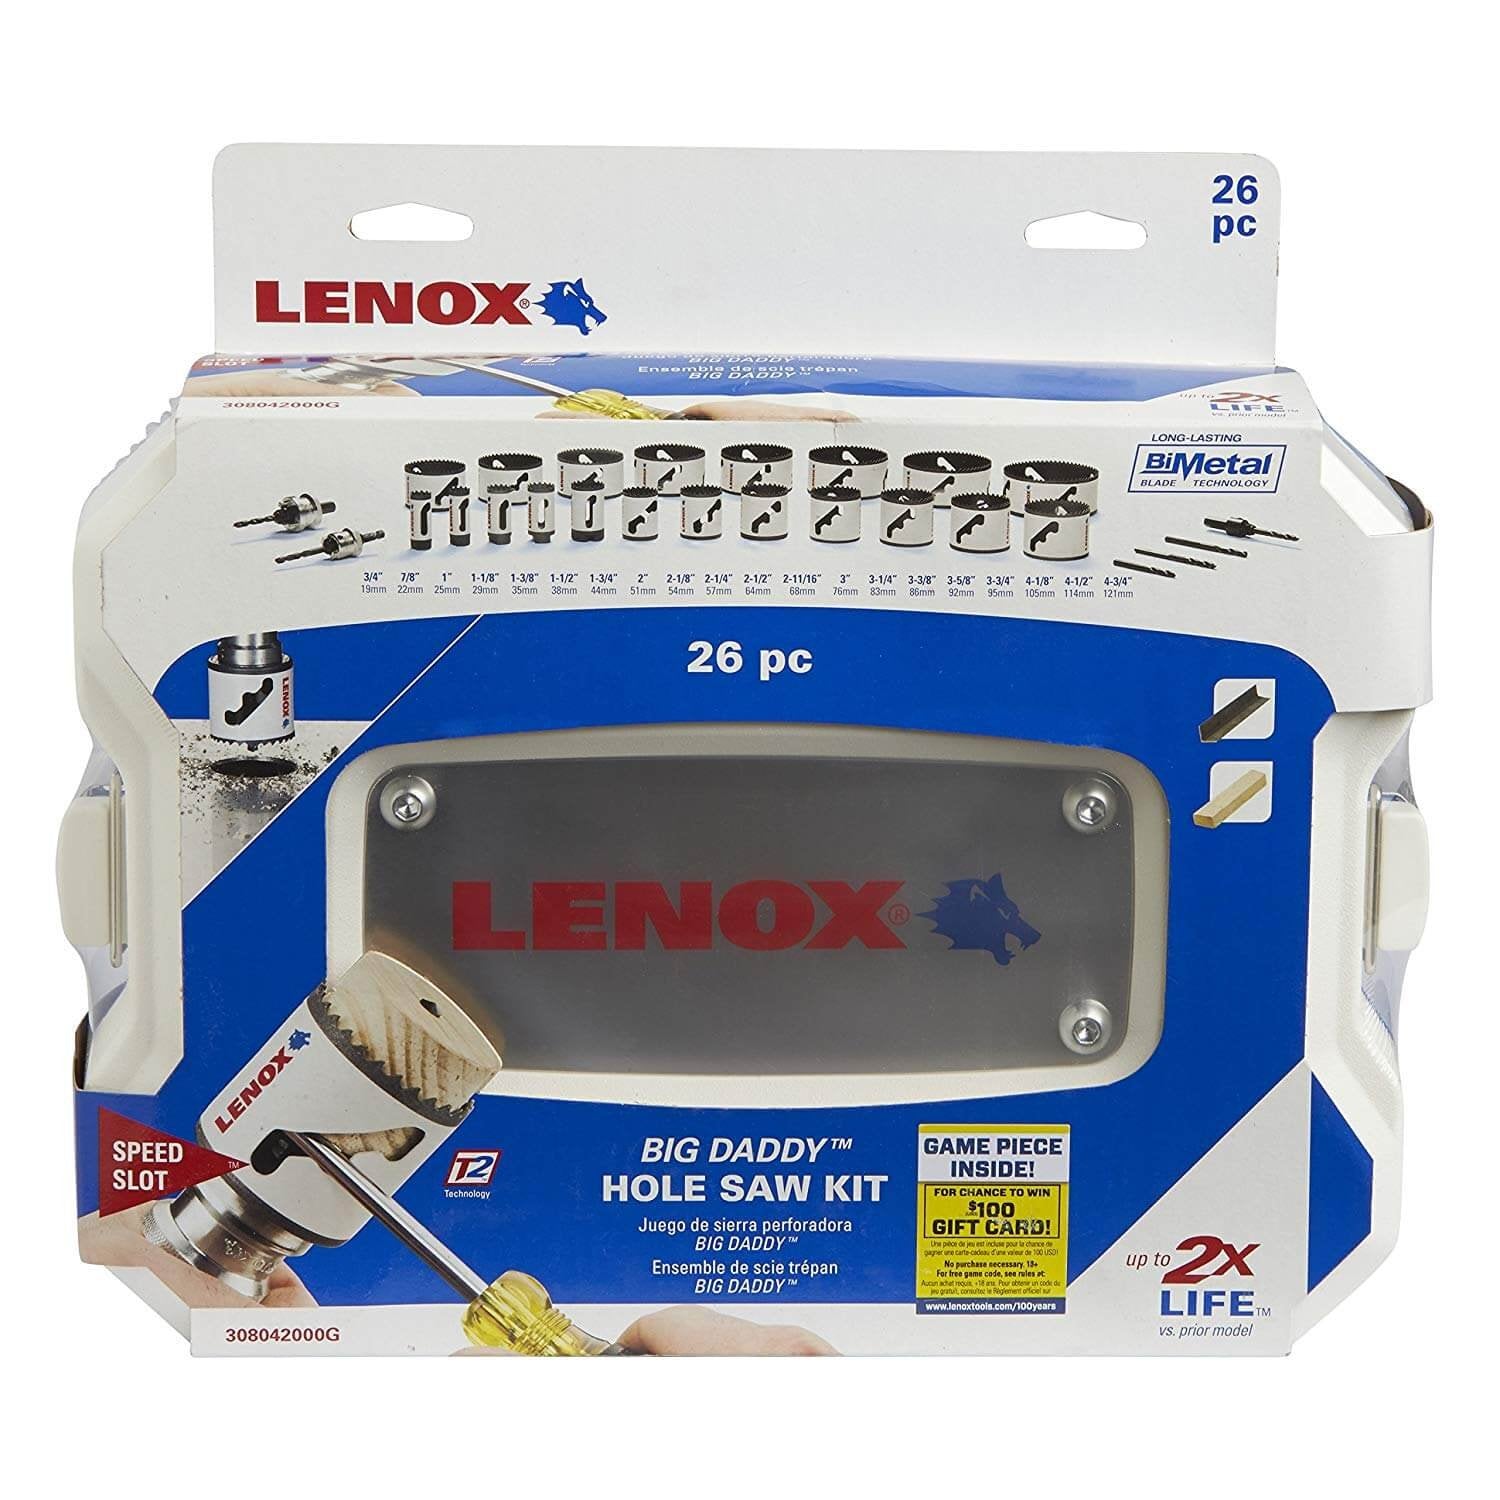 LENOX CONTRACTOR'S BIG DADDY™ SPEED SLOT® HOLE SAW KIT, 26 PIECE